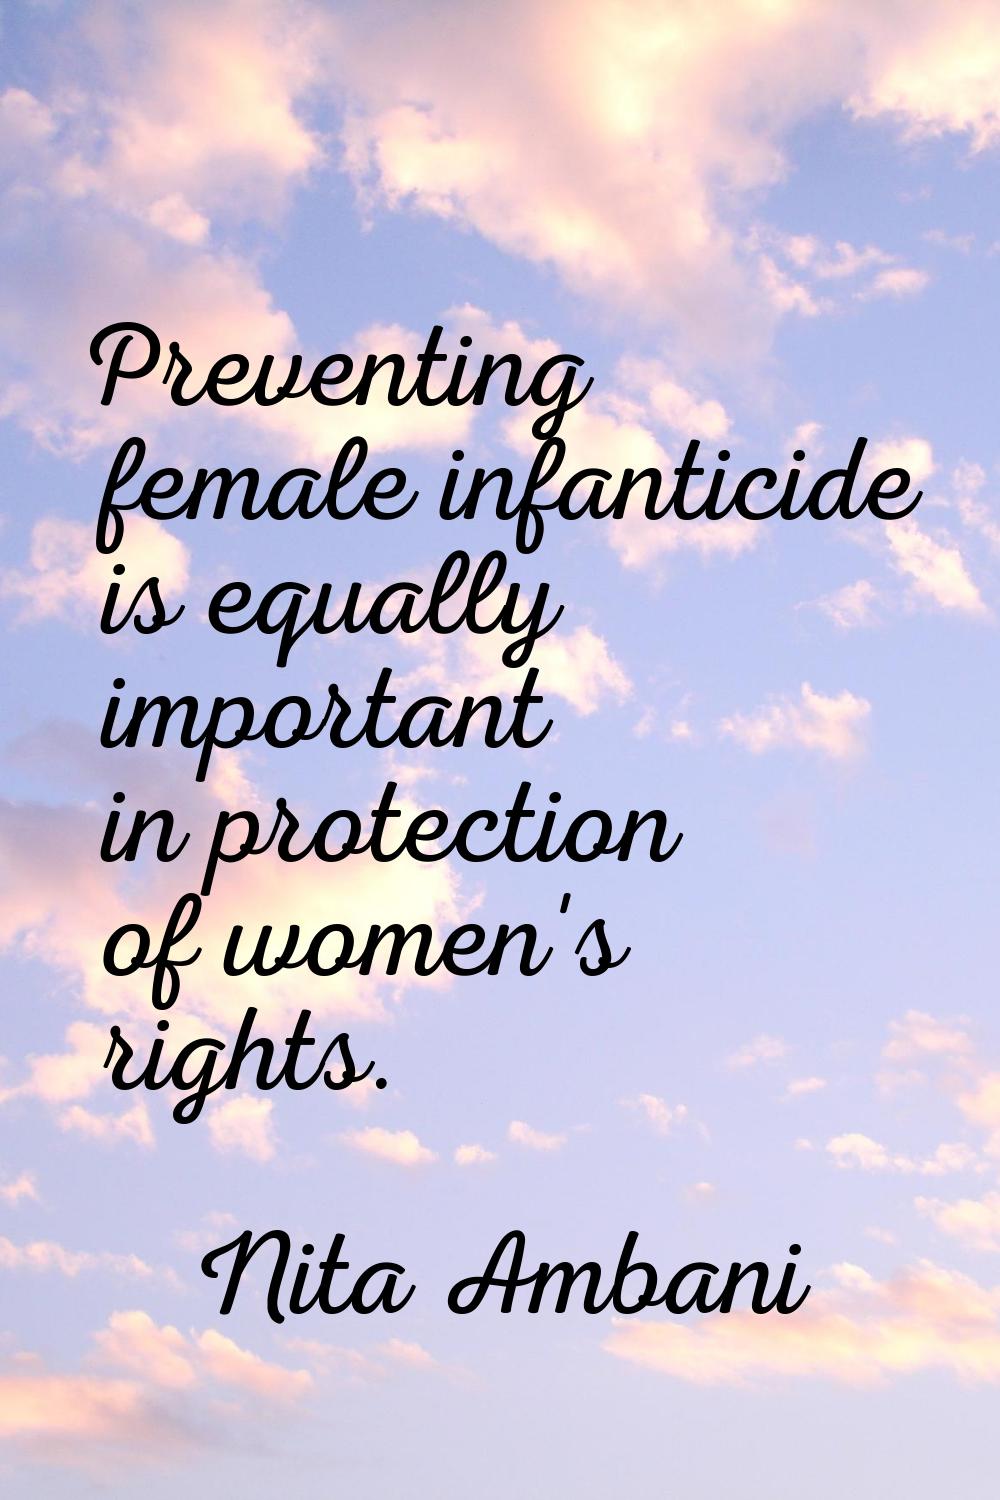 Preventing female infanticide is equally important in protection of women's rights.